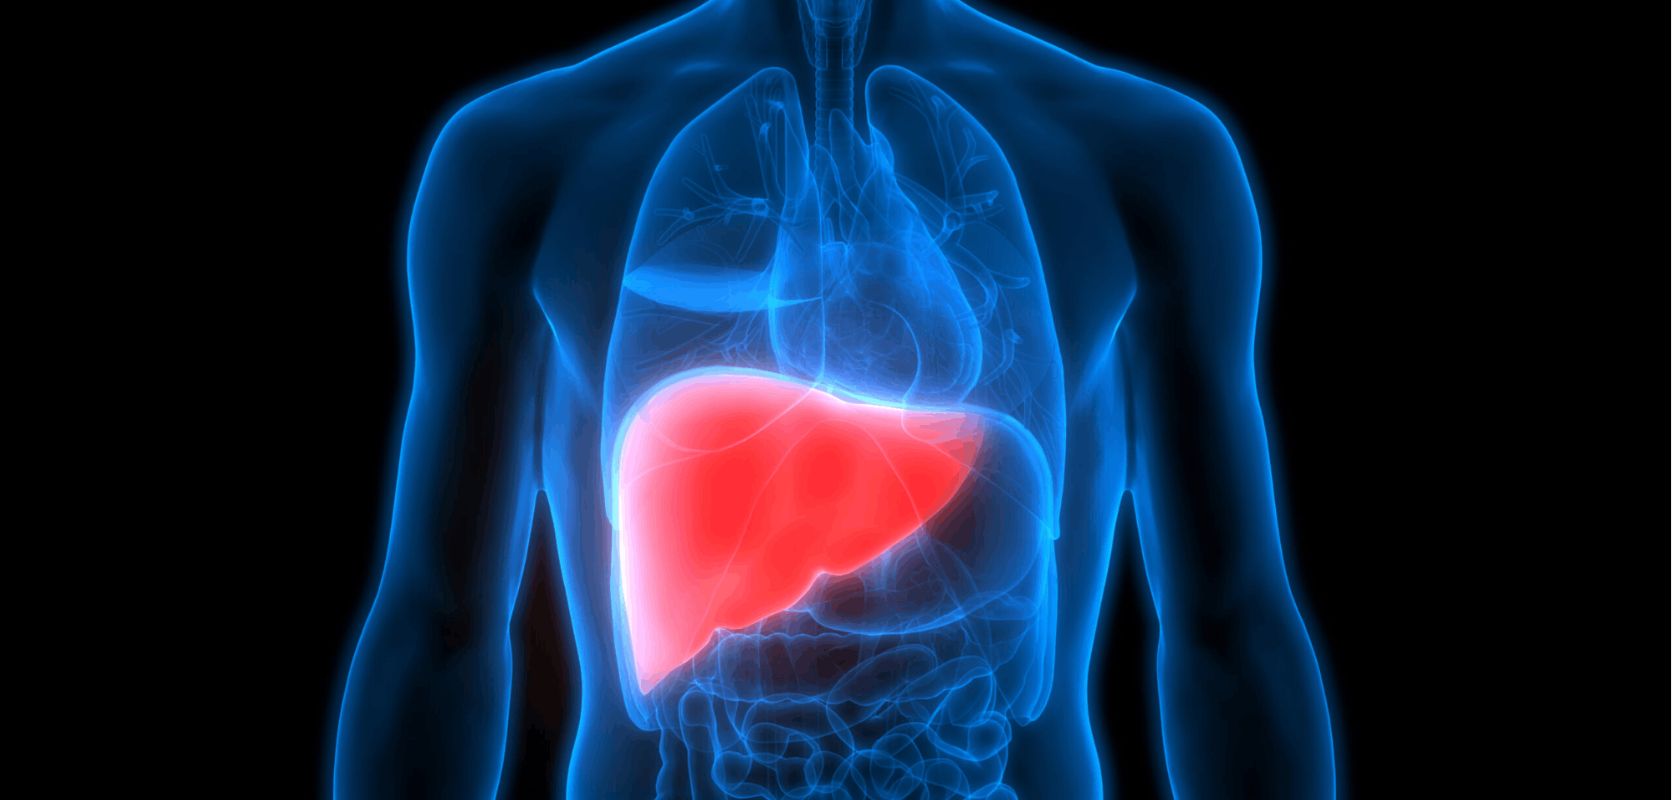 The liver is a large, vital organ located in the upper right part of the abdomen. It plays a crucial role in digestion and has several key functions